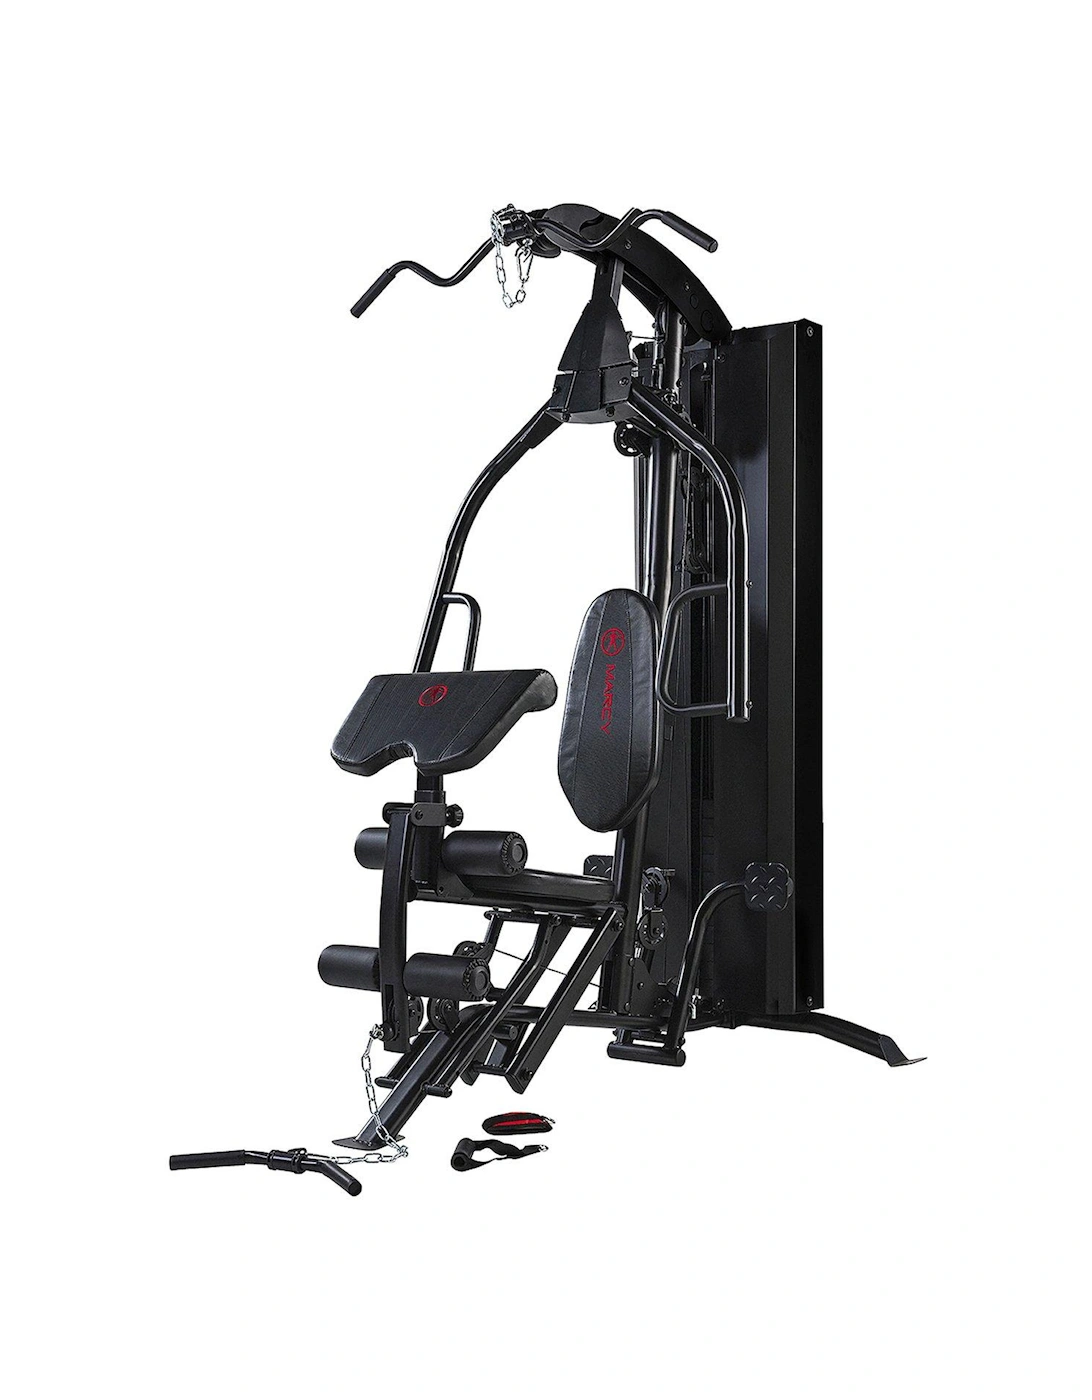 HG7000 Eclipse Home Multi Gym with Leg Press, 2 of 1